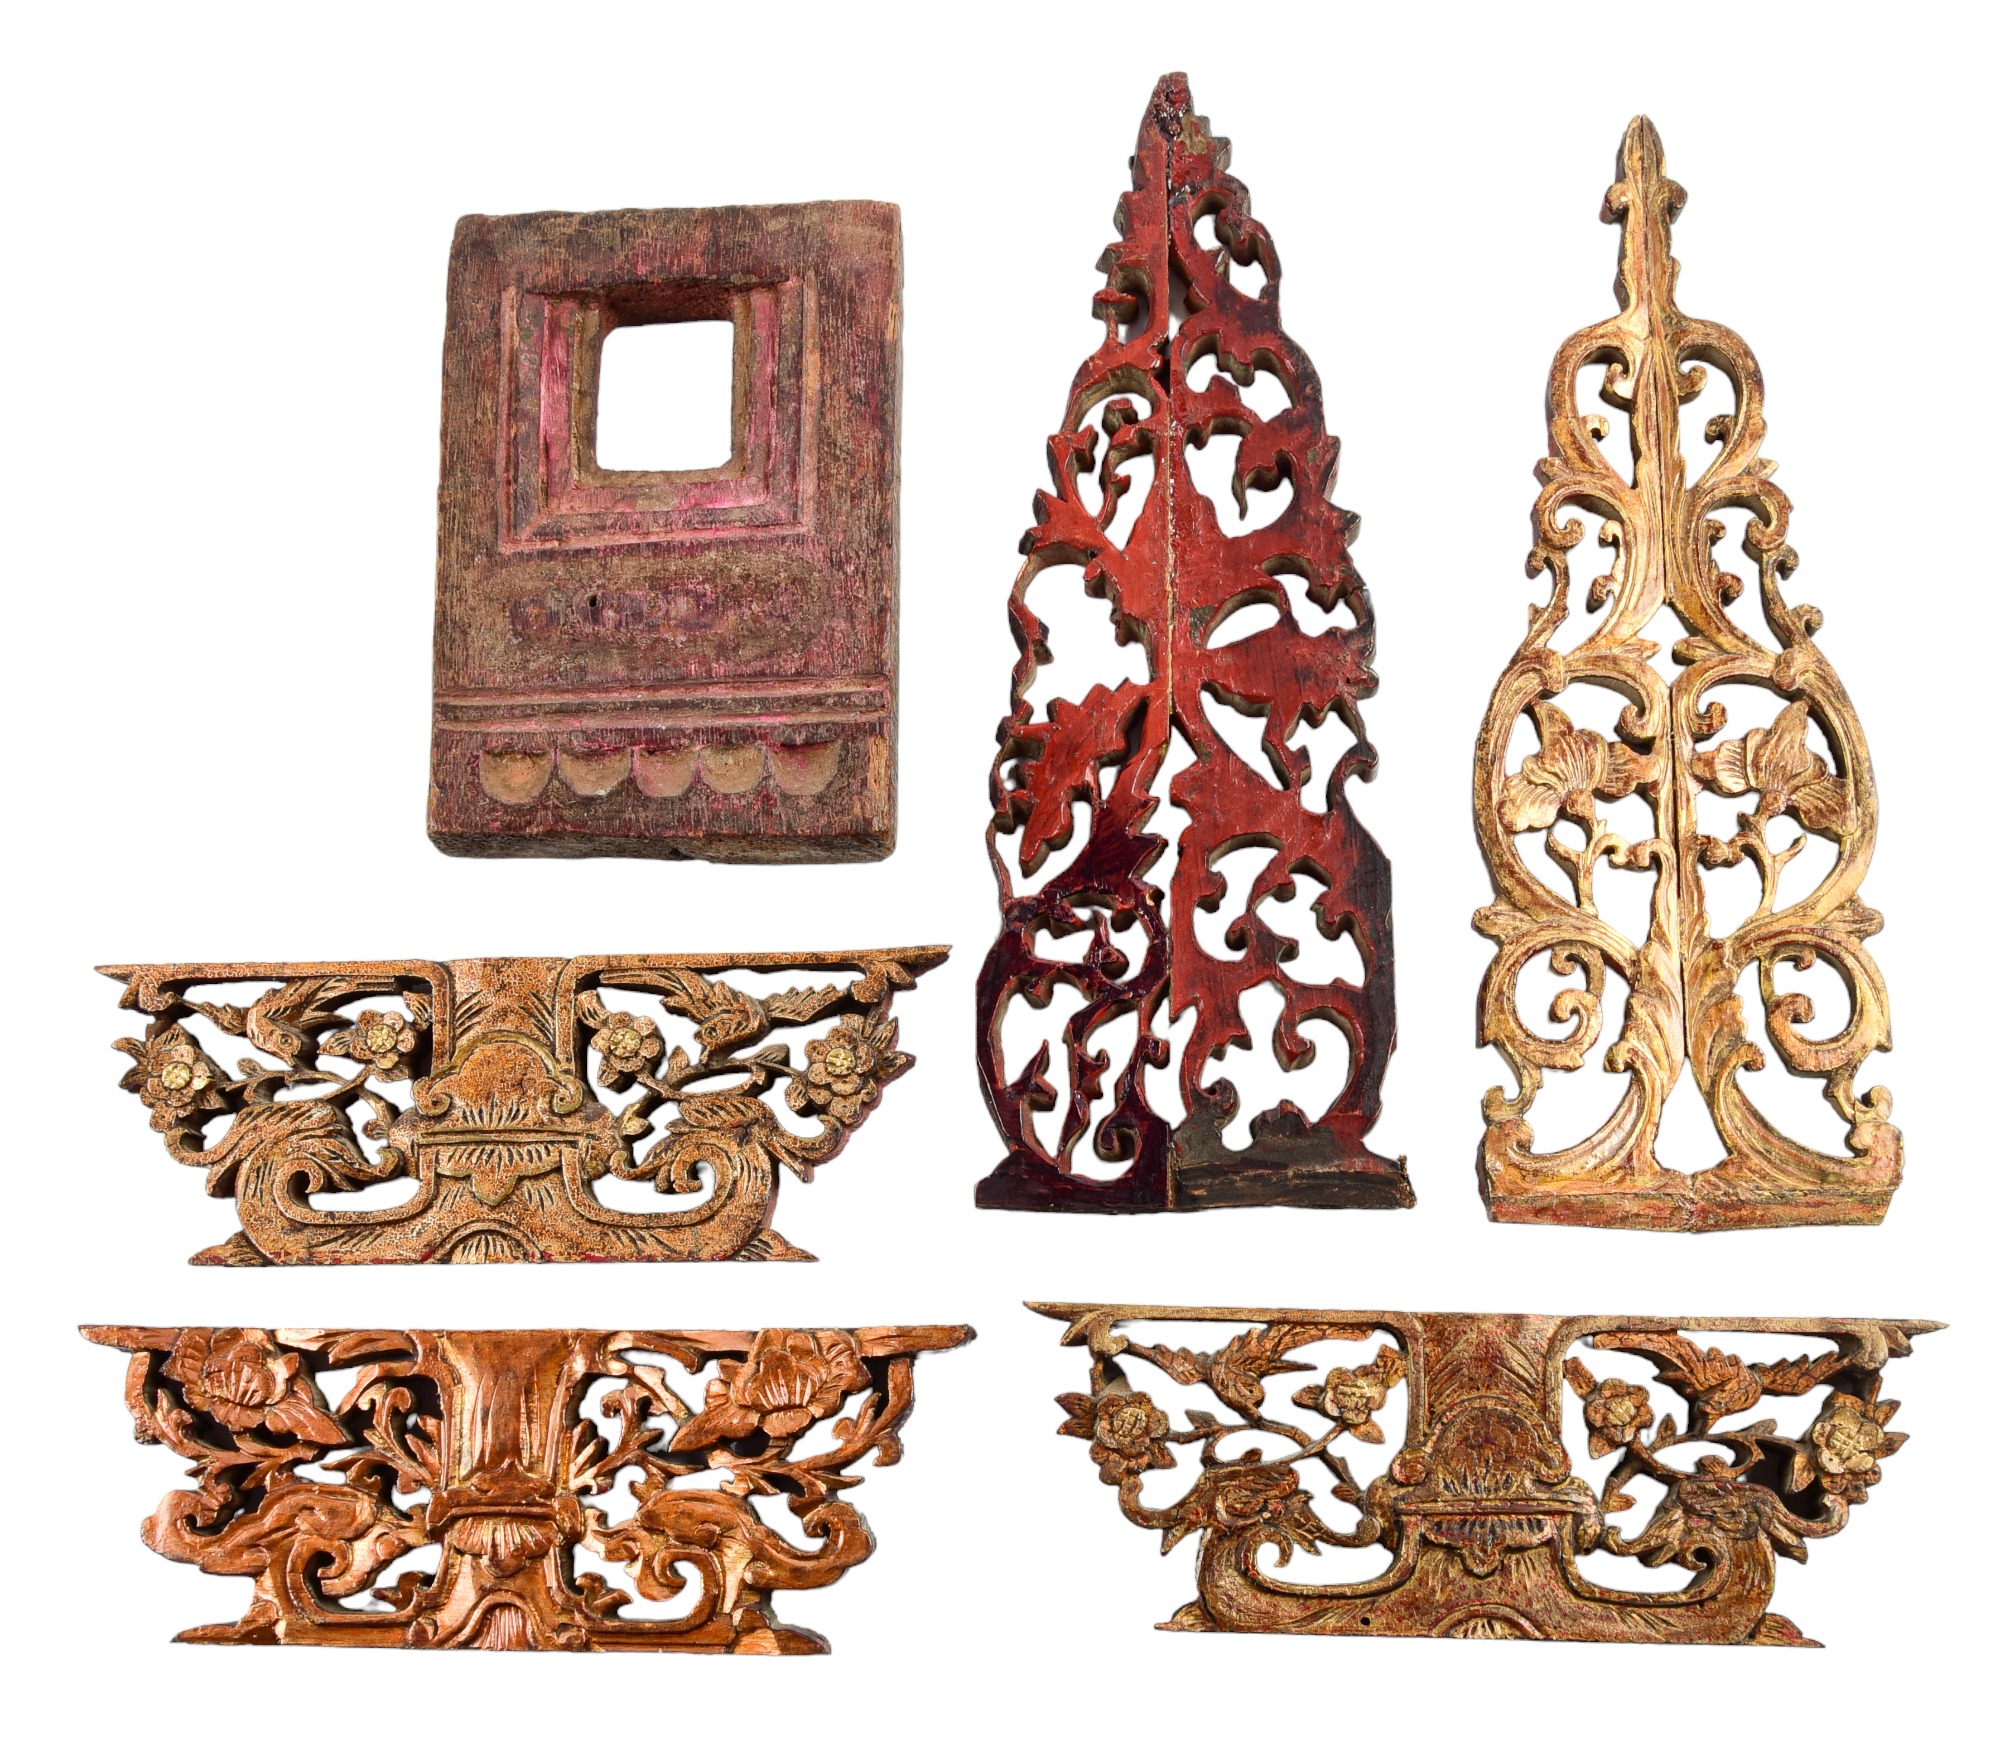  6 Asian carved wood architectural 3ca709